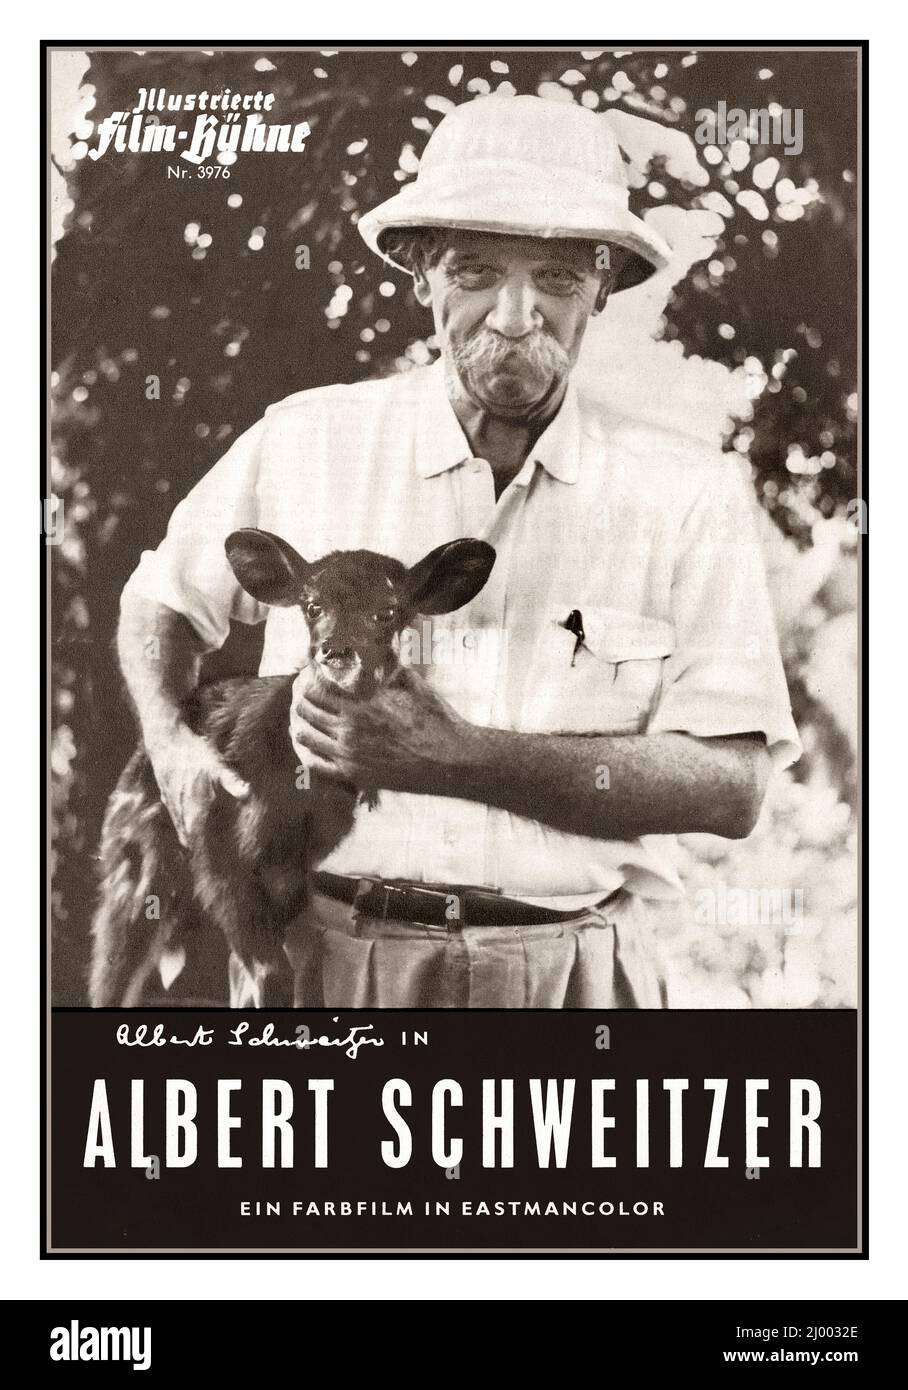 Albert Schweitzer film promo signed poster card promoting 1957 film ' Albert Schweitzer',  Albert Schweitzer is a 1957 American biographical documentary about Albert Schweitzer directed by Jerome Hill. It won the Academy Award for Best Documentary Feature for 1958 Alsatian medical missionary and theologian, philosopher and musician (1875-1965) Film directed by Jerome Hill and filmed by Erica Anderson. Directed by Jerome Hill Written byAlbert Schweitzer Thomas Bruce Morgan Produced by Jerome Hill  Narrated by Fredric March Burgess Meredith Cinematography Erica Anderson Edited by Luke Bennett Stock Photo